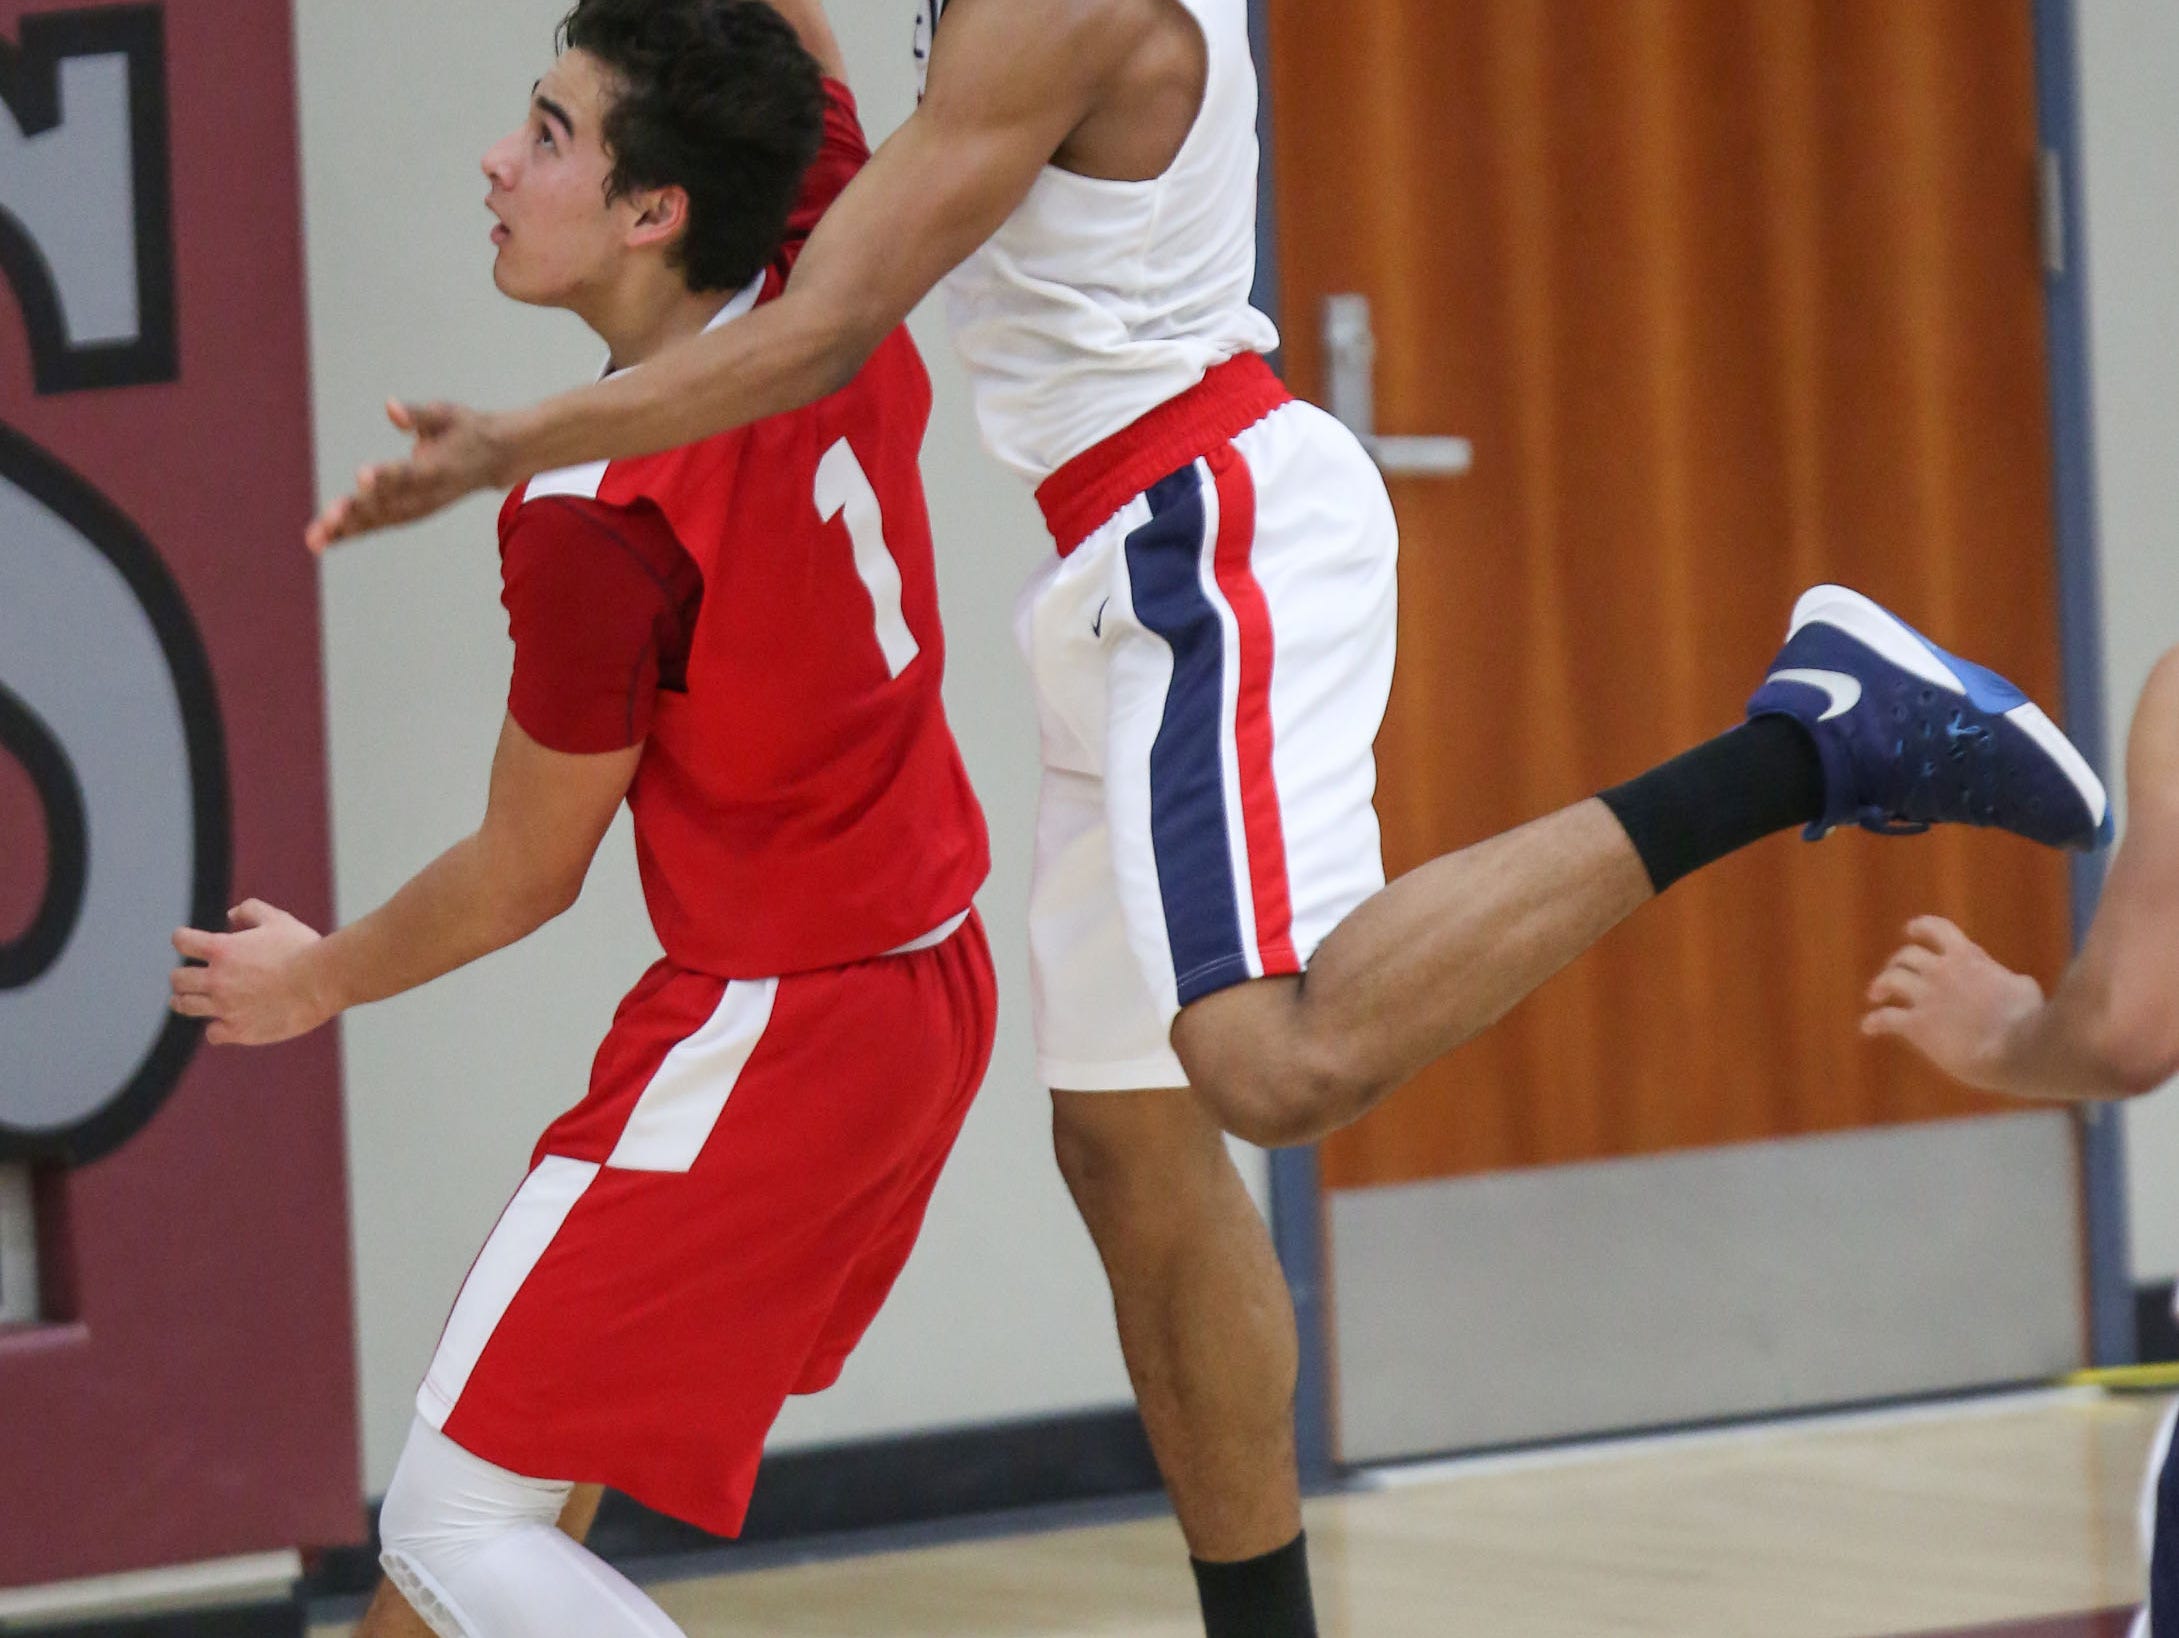 Dylan Ulber of Palm Desert prevents a layup on defense during their loss to Viewpoint at the MaxPreps Holiday Classic in Rancho MIrage, December 30, 2016.